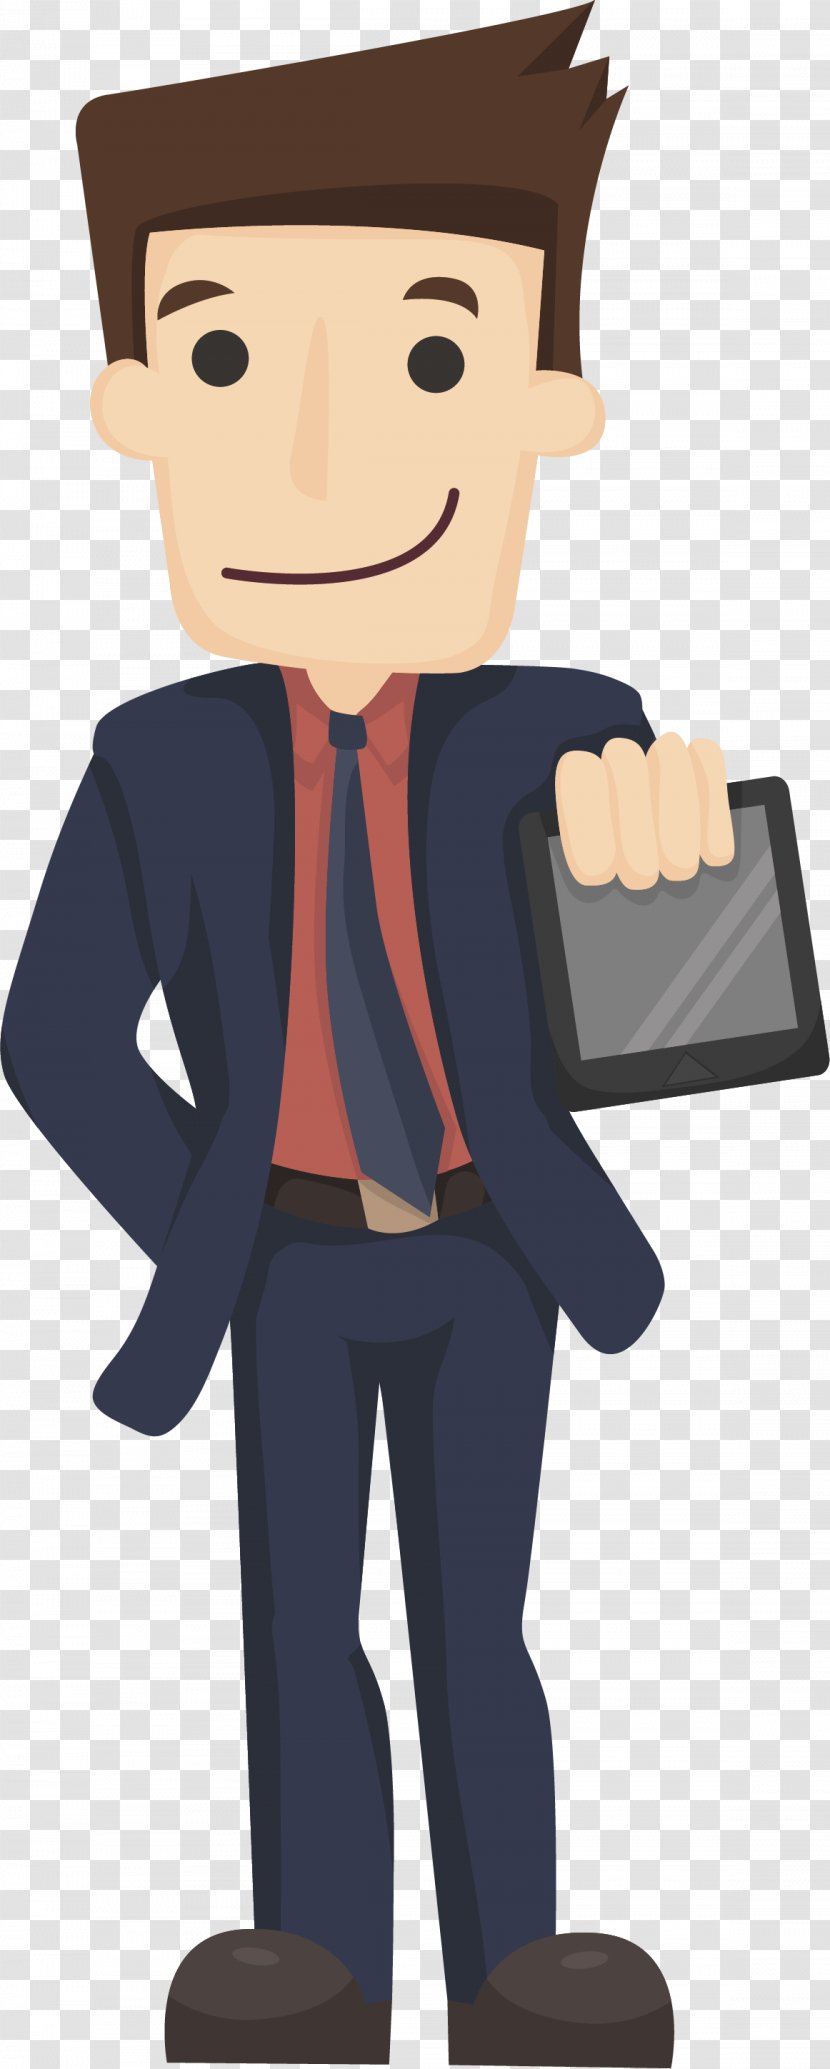 Businessperson Cartoon Illustration - Human Behavior - Someone Who Is Using A Cell Phone Transparent PNG